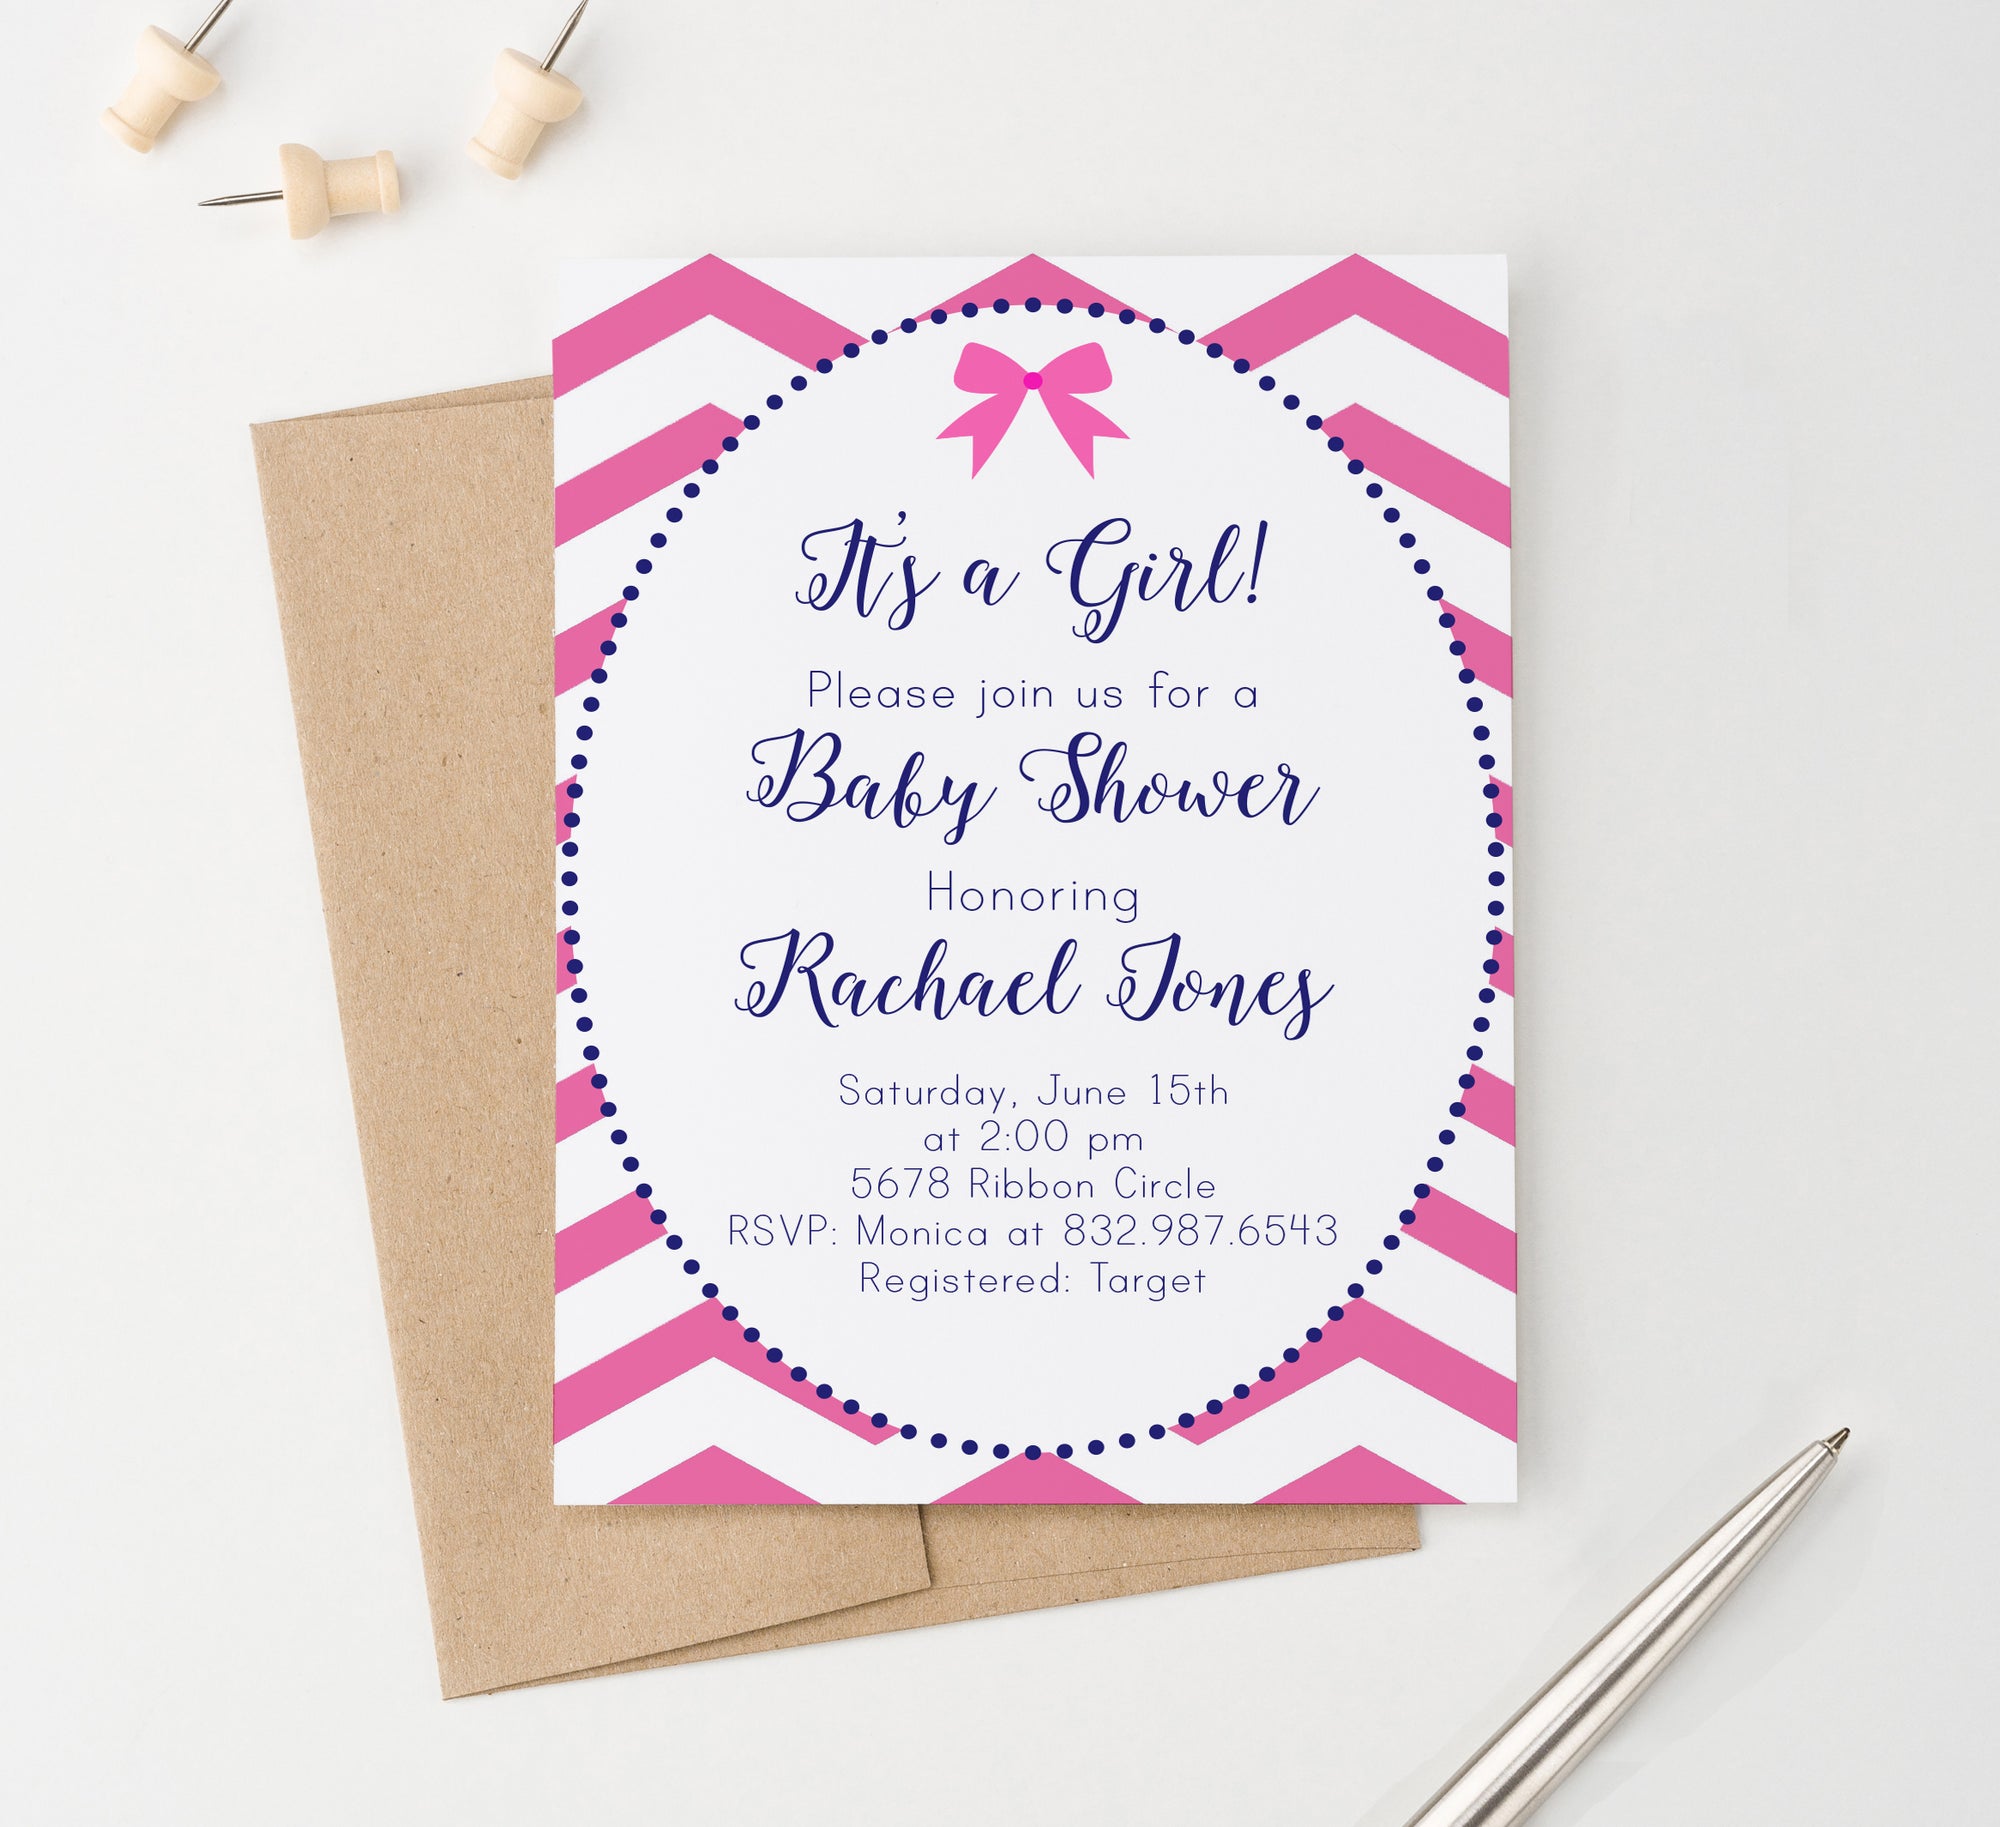 Personalized Pink Chevron Baby Shower Invites With Polka Dot Frame